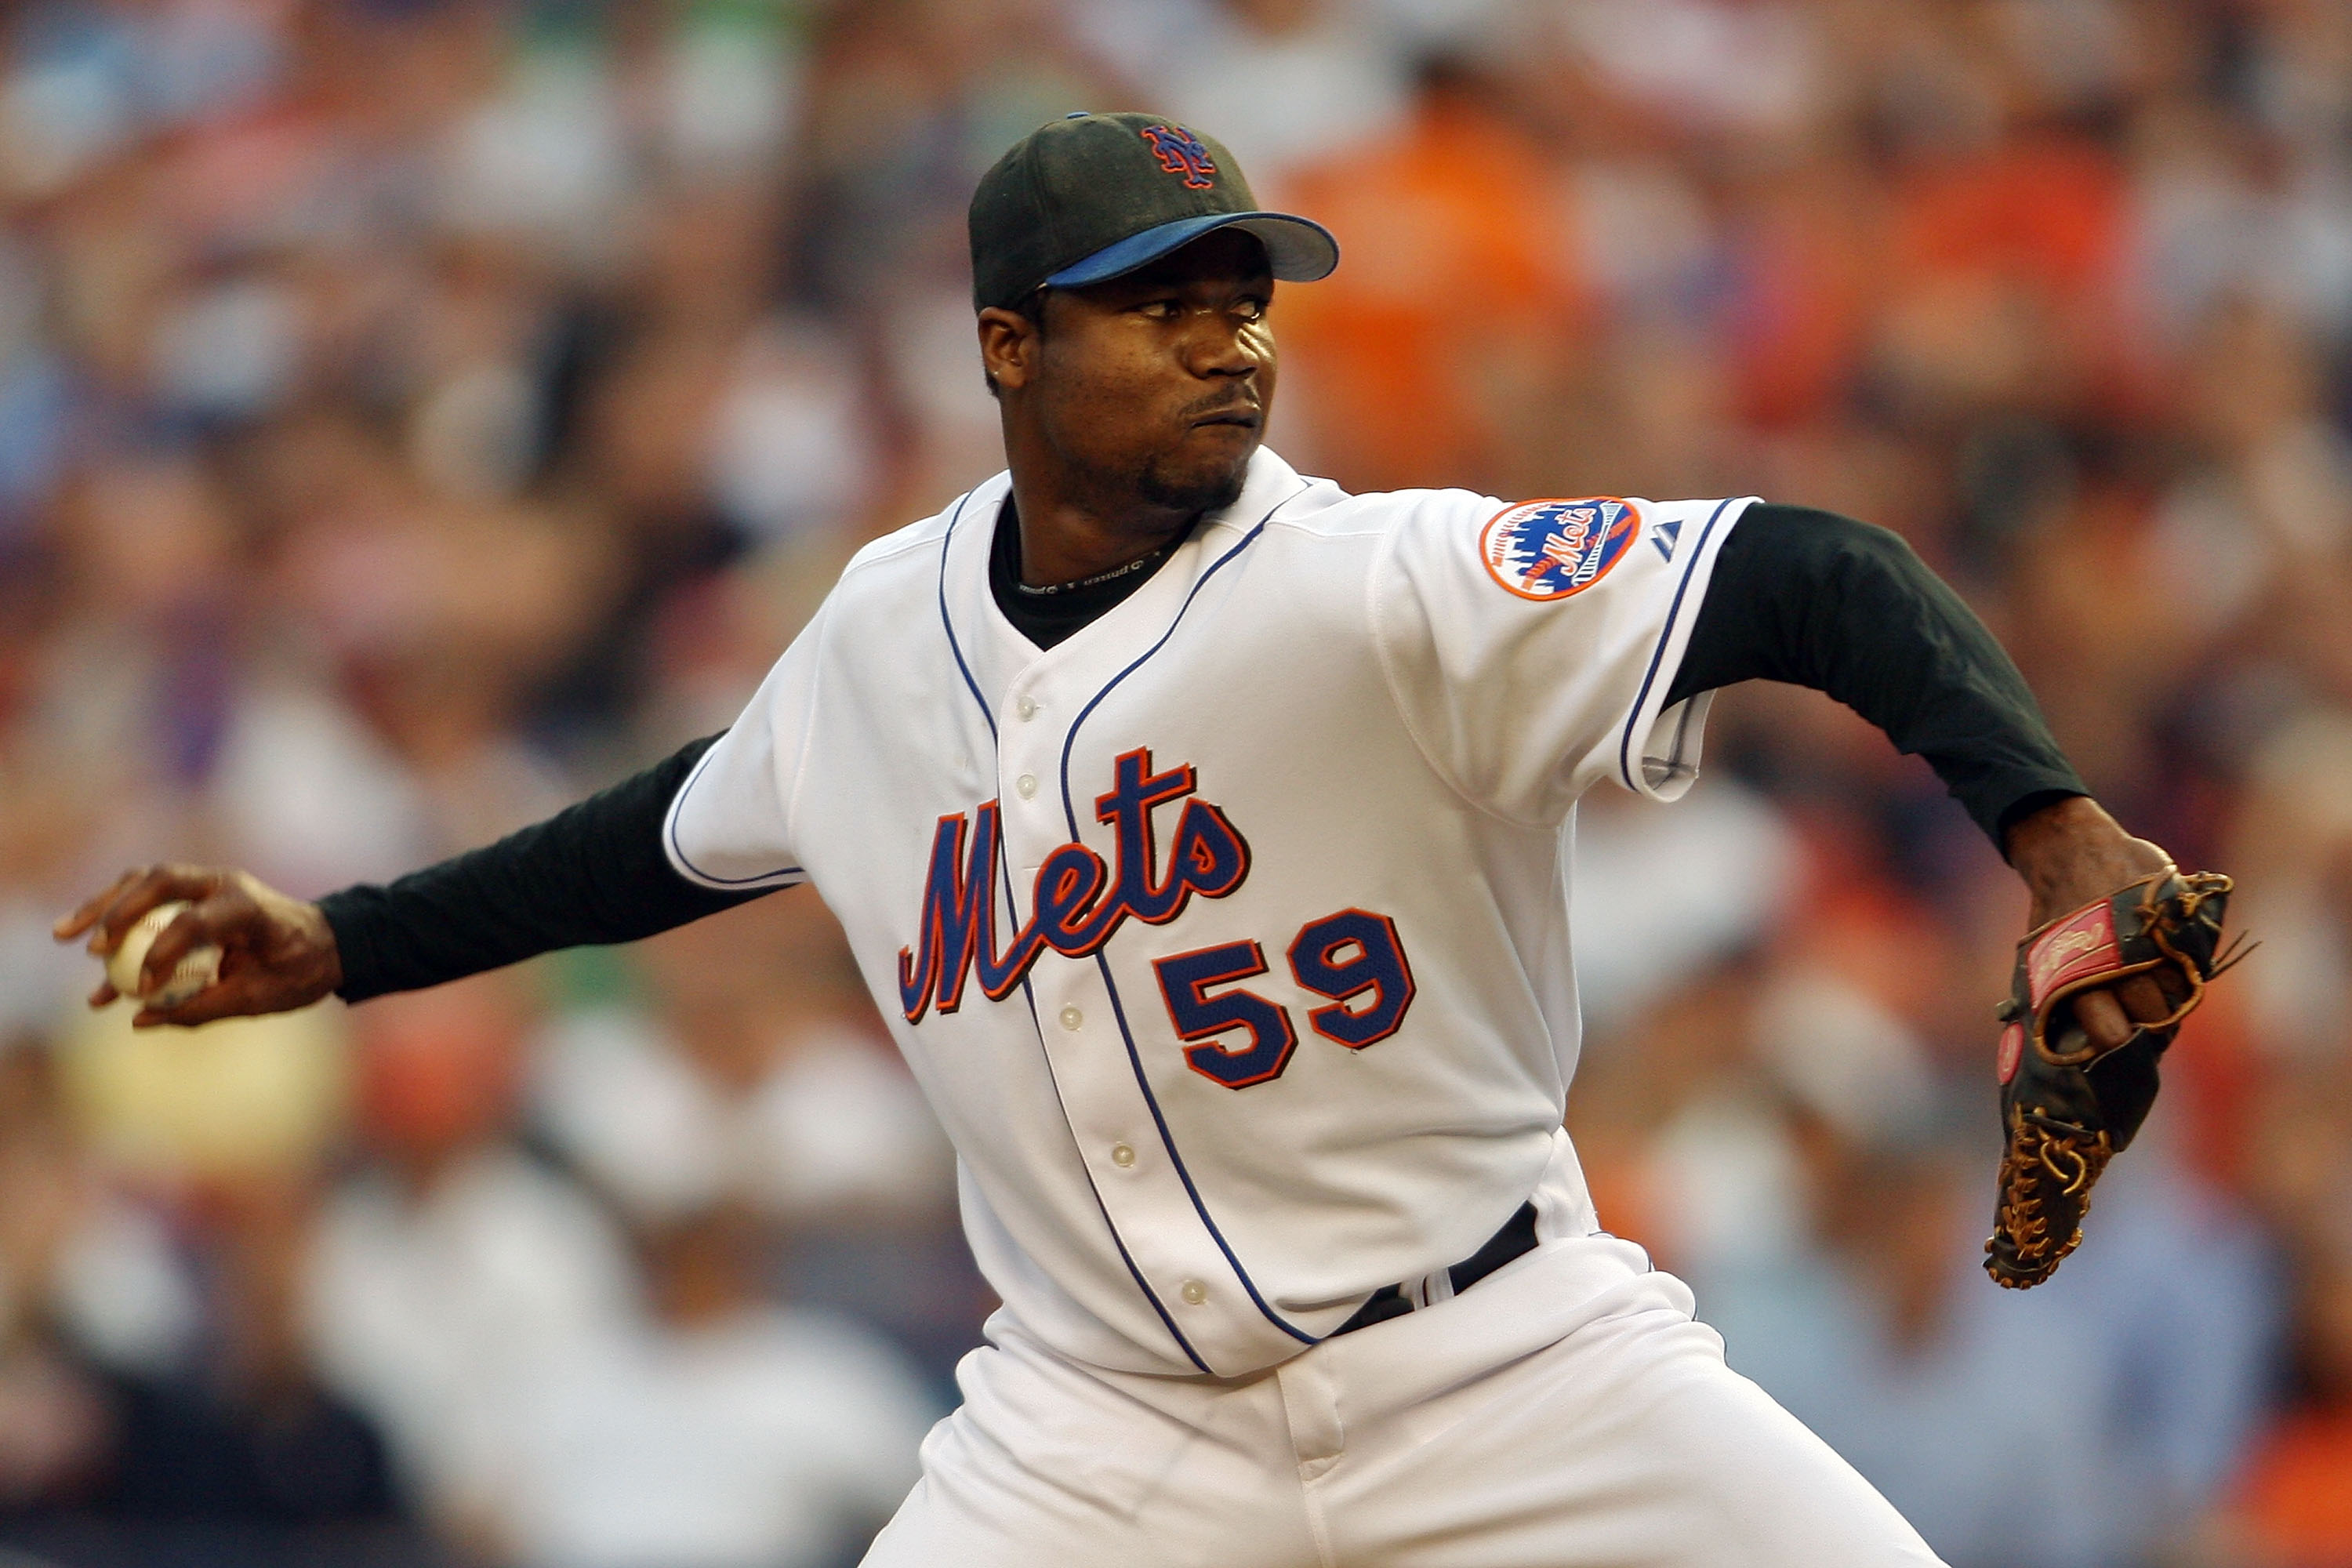 Hear the inside story of how the Mets signed Pedro Martinez on 2004, Baseball Night in NY